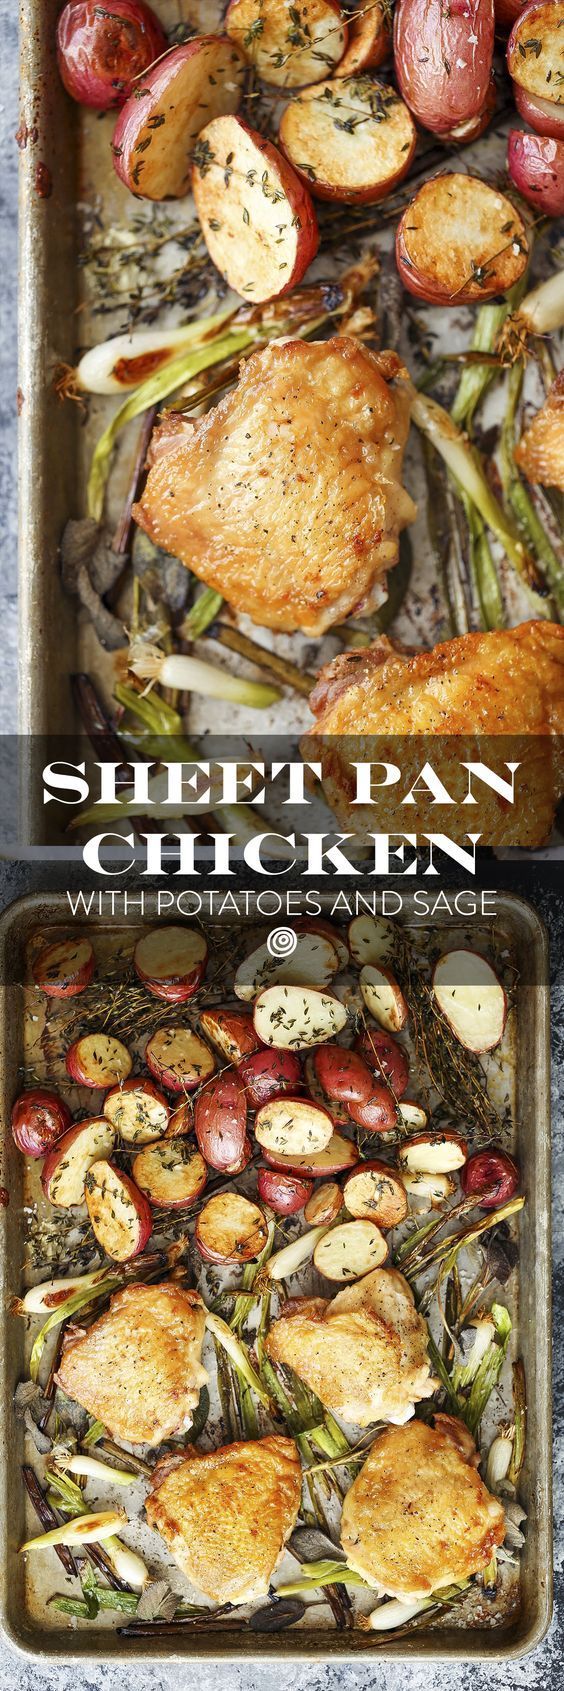 A great sheet pan meal can feel like a minor miracle: throw everything on one pan,